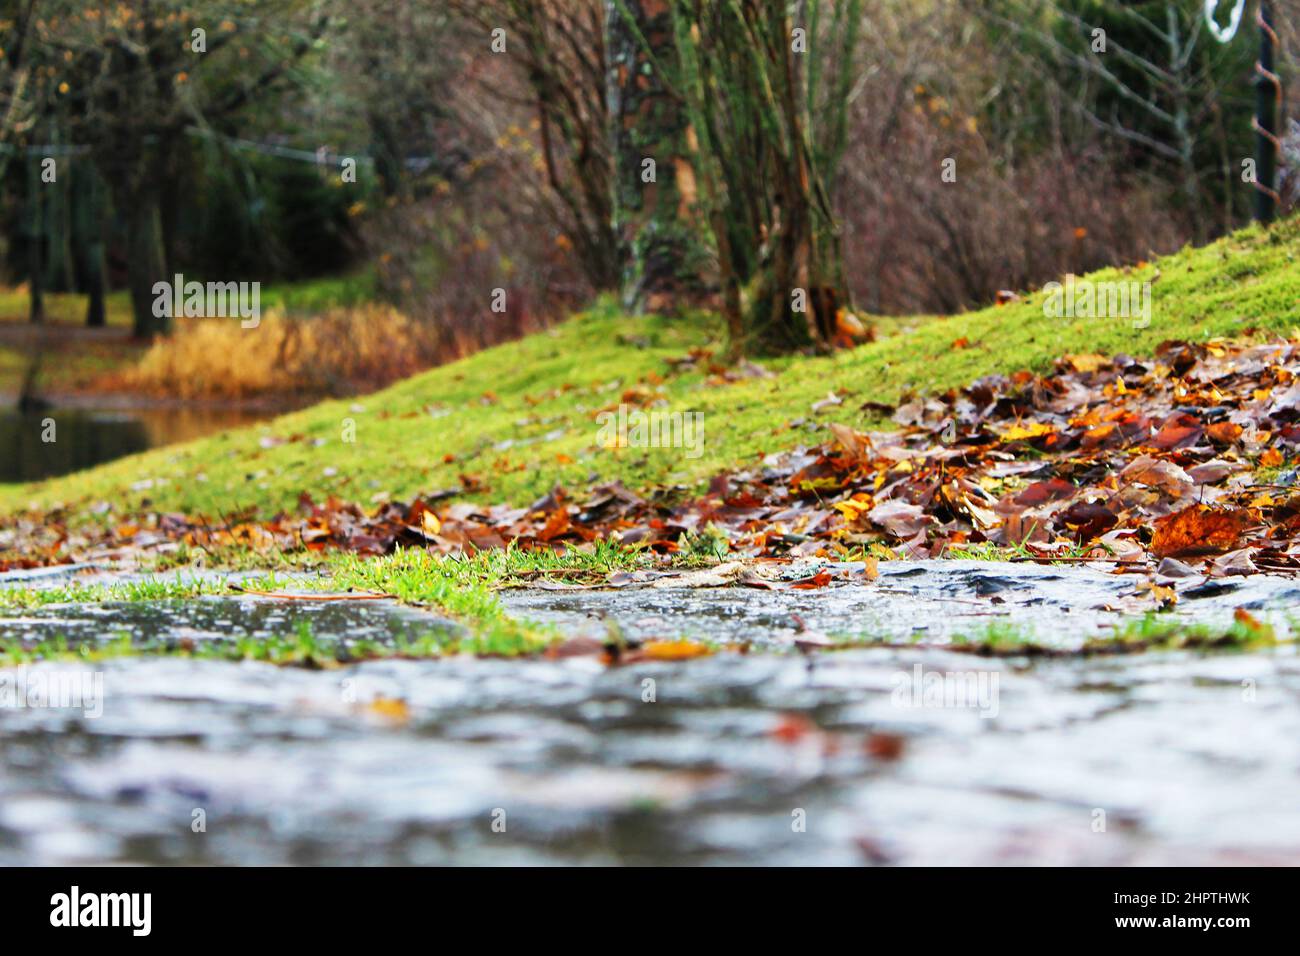 looking across a stone footpath at autumn leaves on a grassy hill, trees, and a pond, in the park, ground level view, focus on mid-ground. Stock Photo